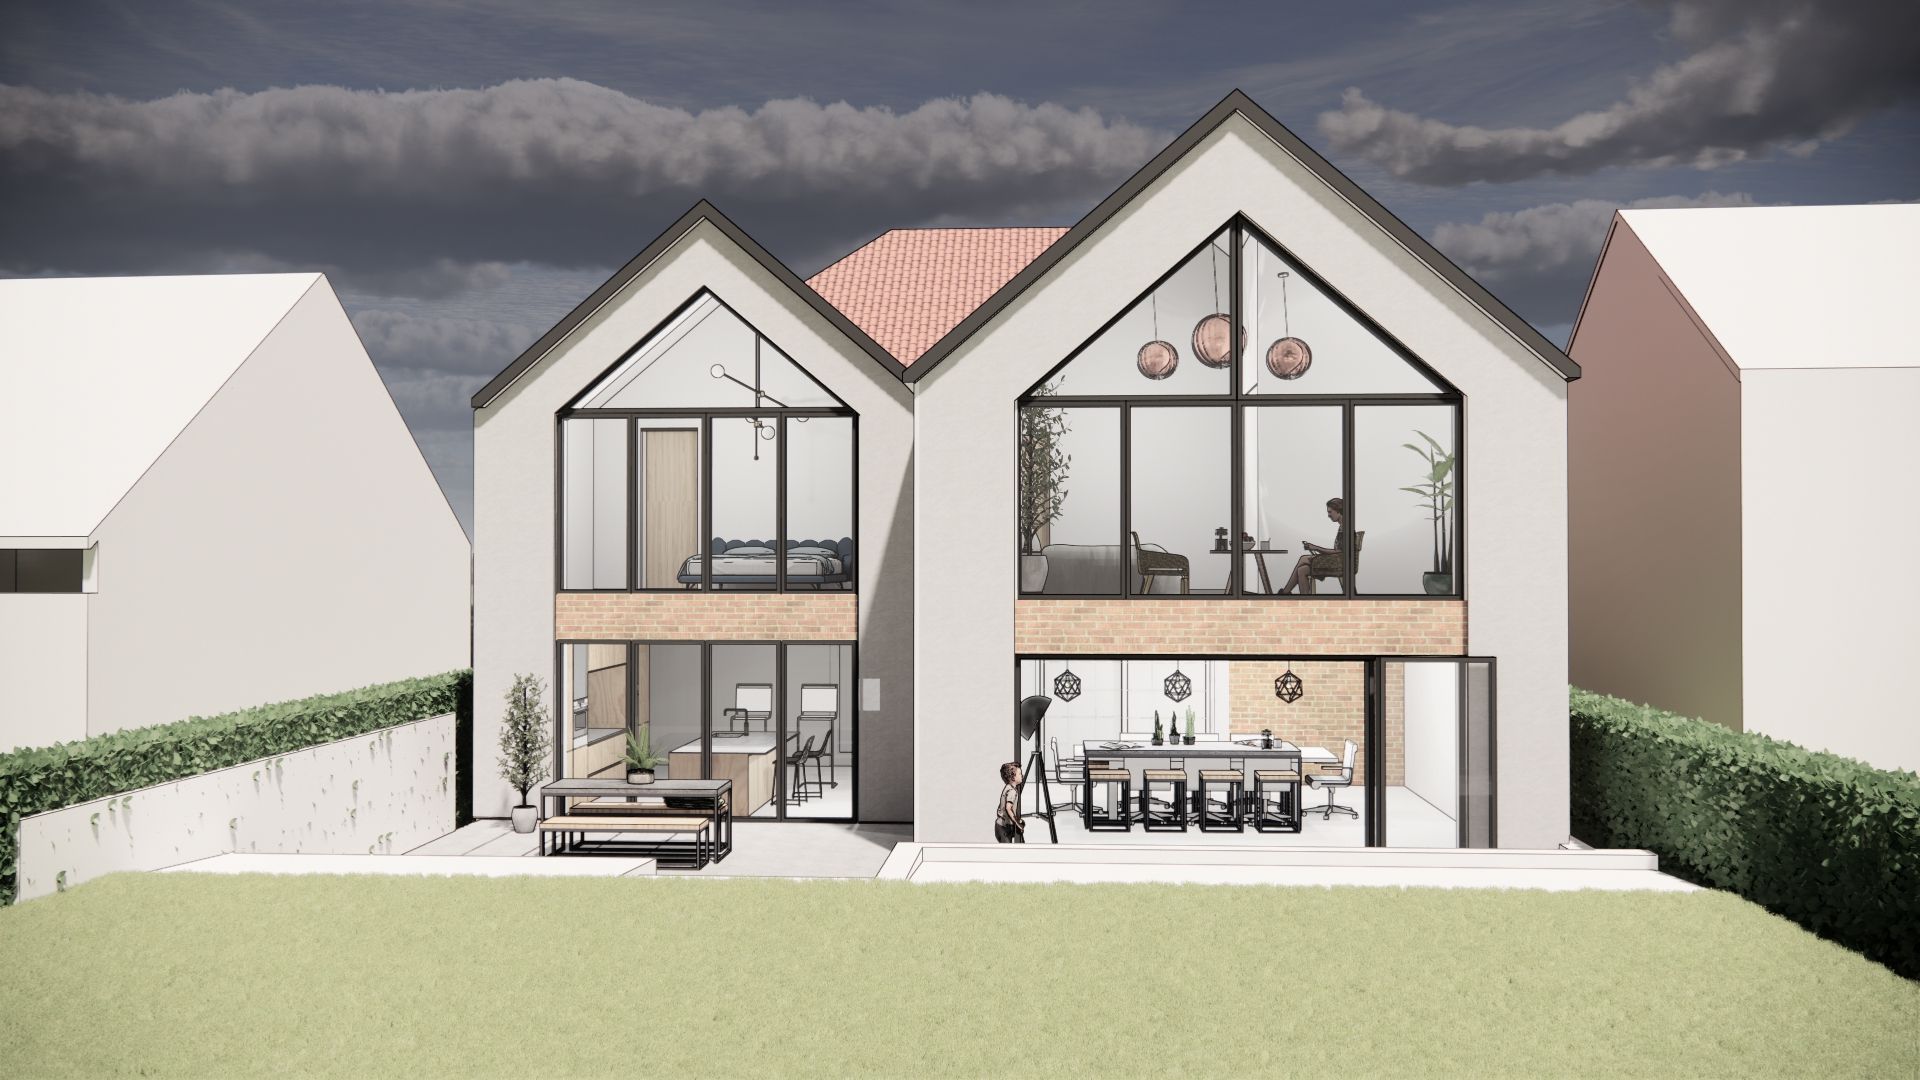 Planning Granted in Amber Valley, Derbyshire